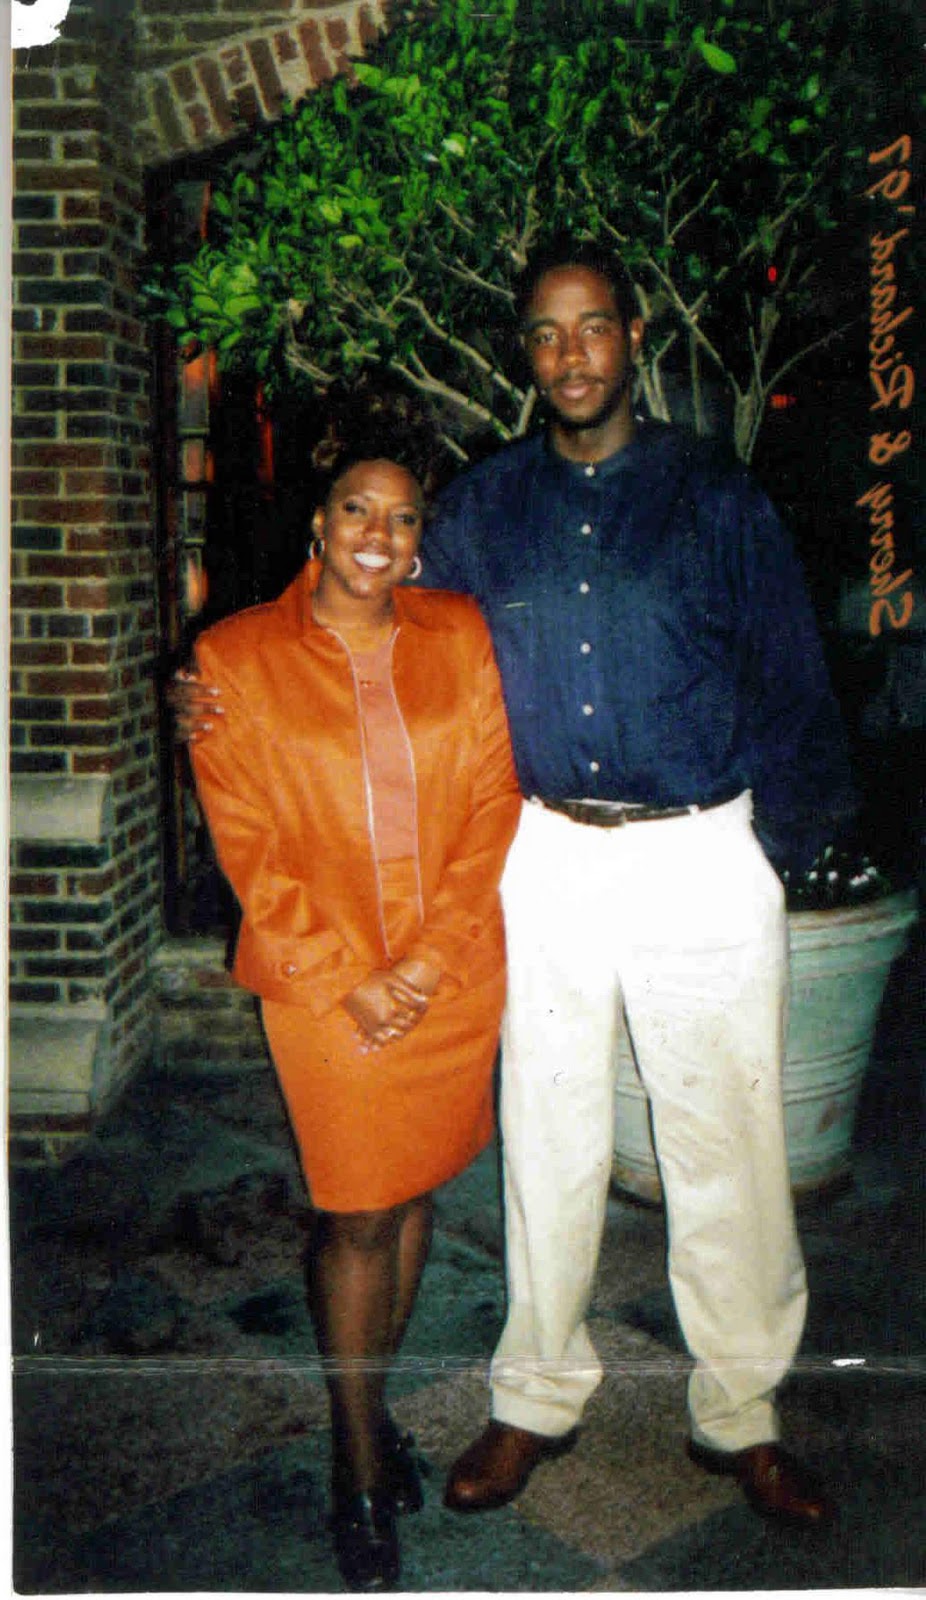 Our first date- October 1997.